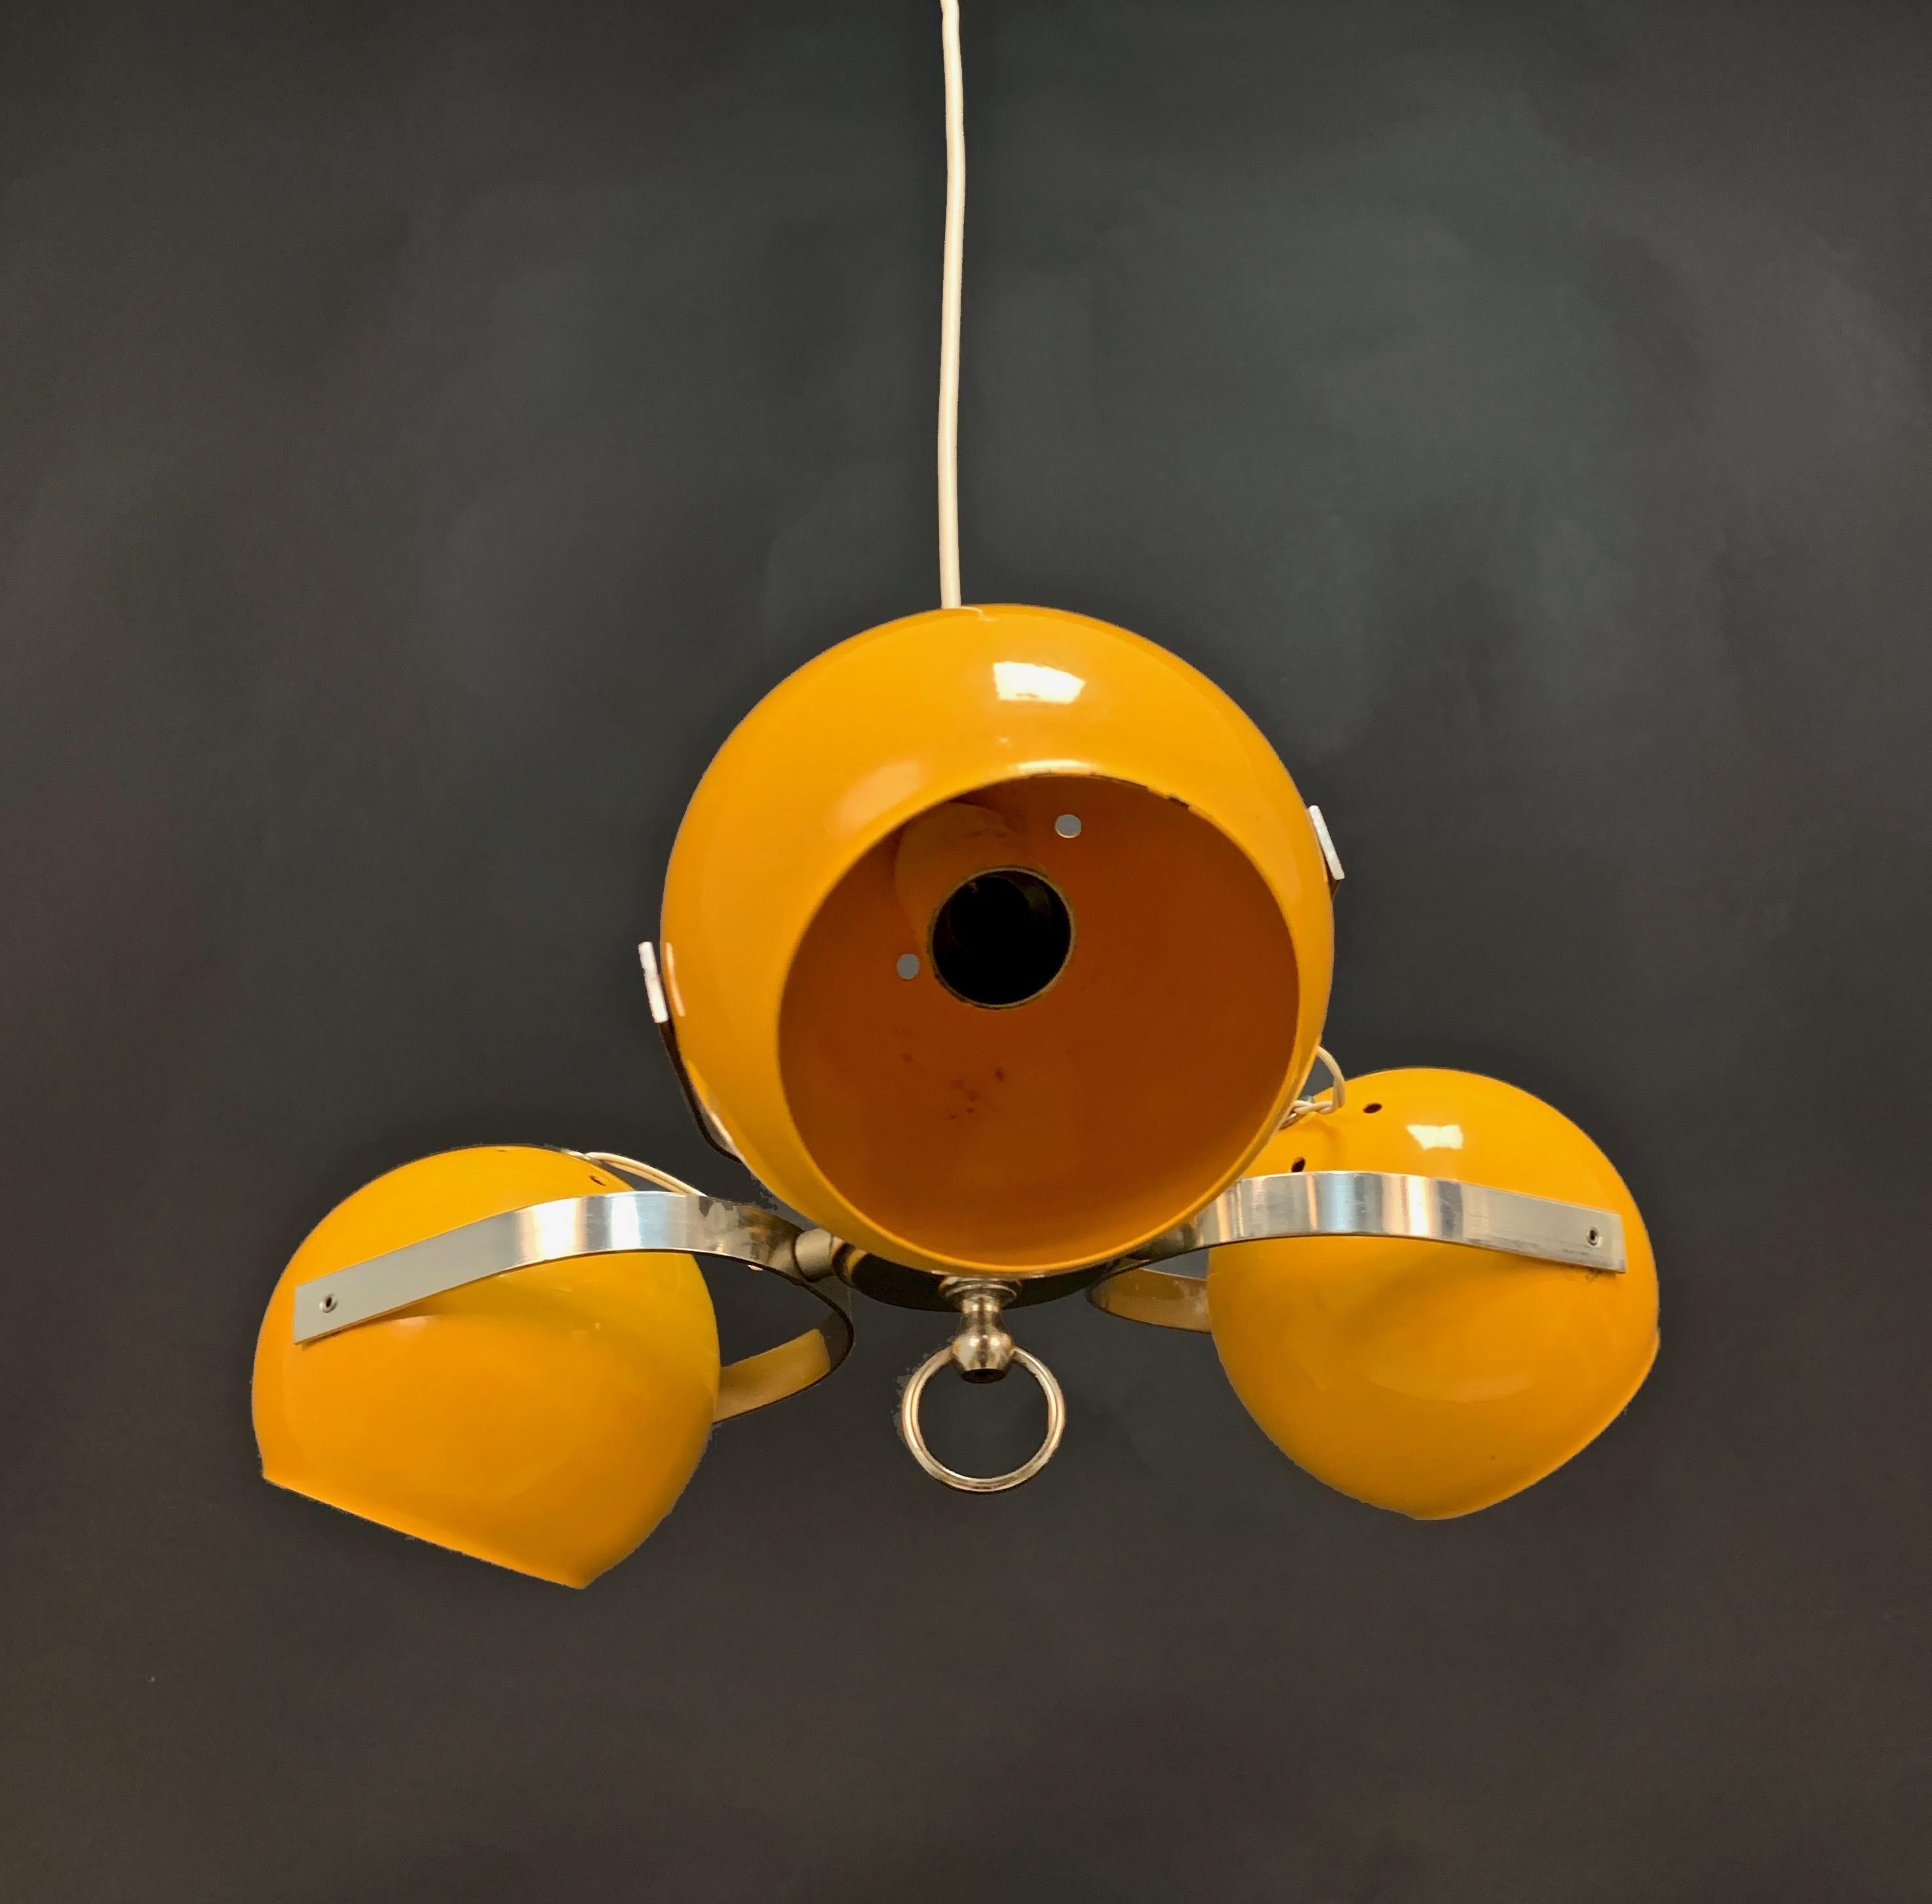 Chandelier with Three Adjustable Lights Yellow and Chrome, Italy, 1970s (20. Jahrhundert)